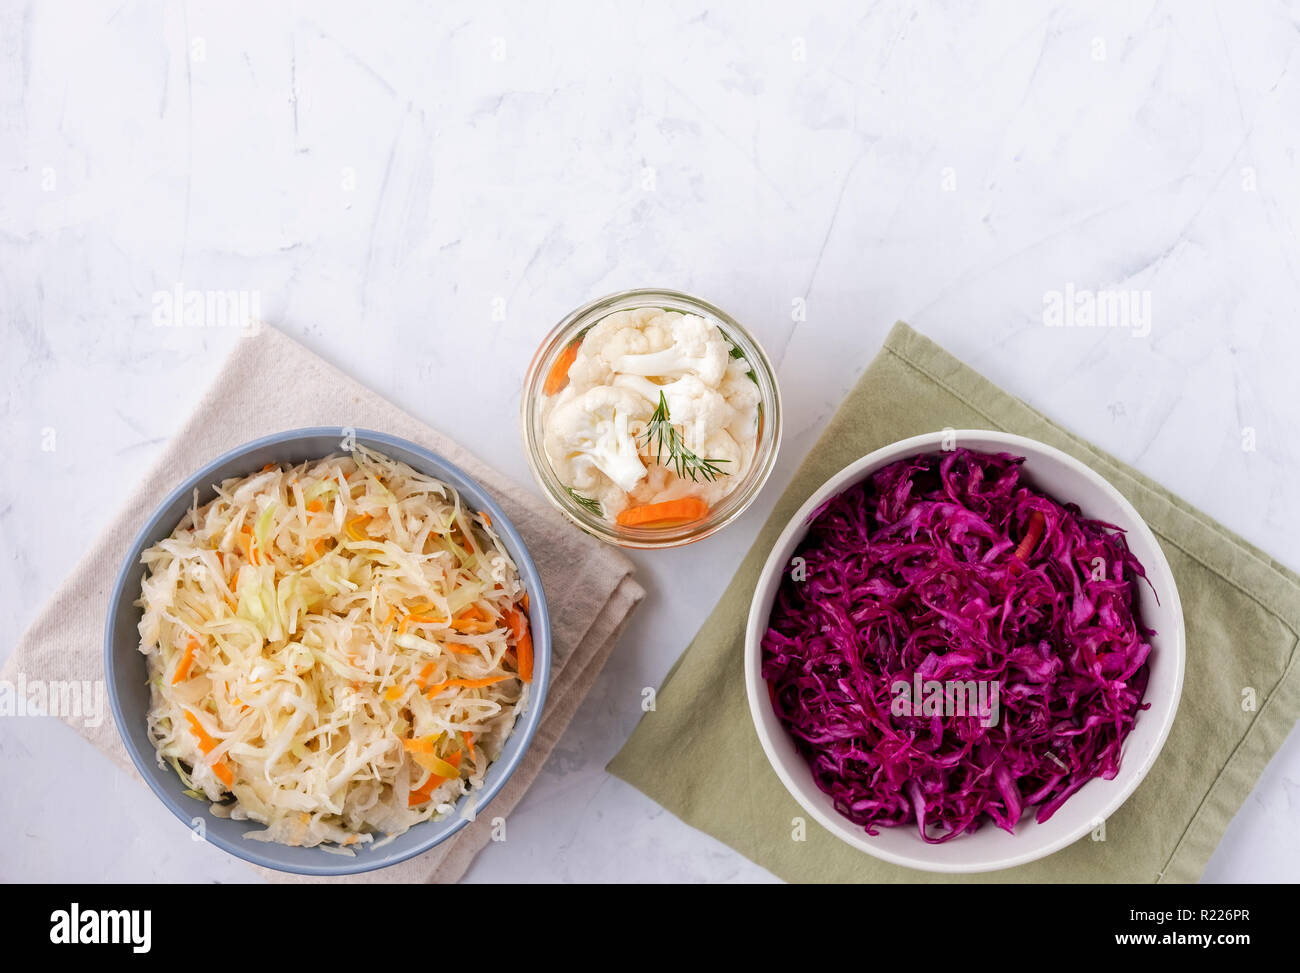 Fermented vegetables on tabletop Stock Photo